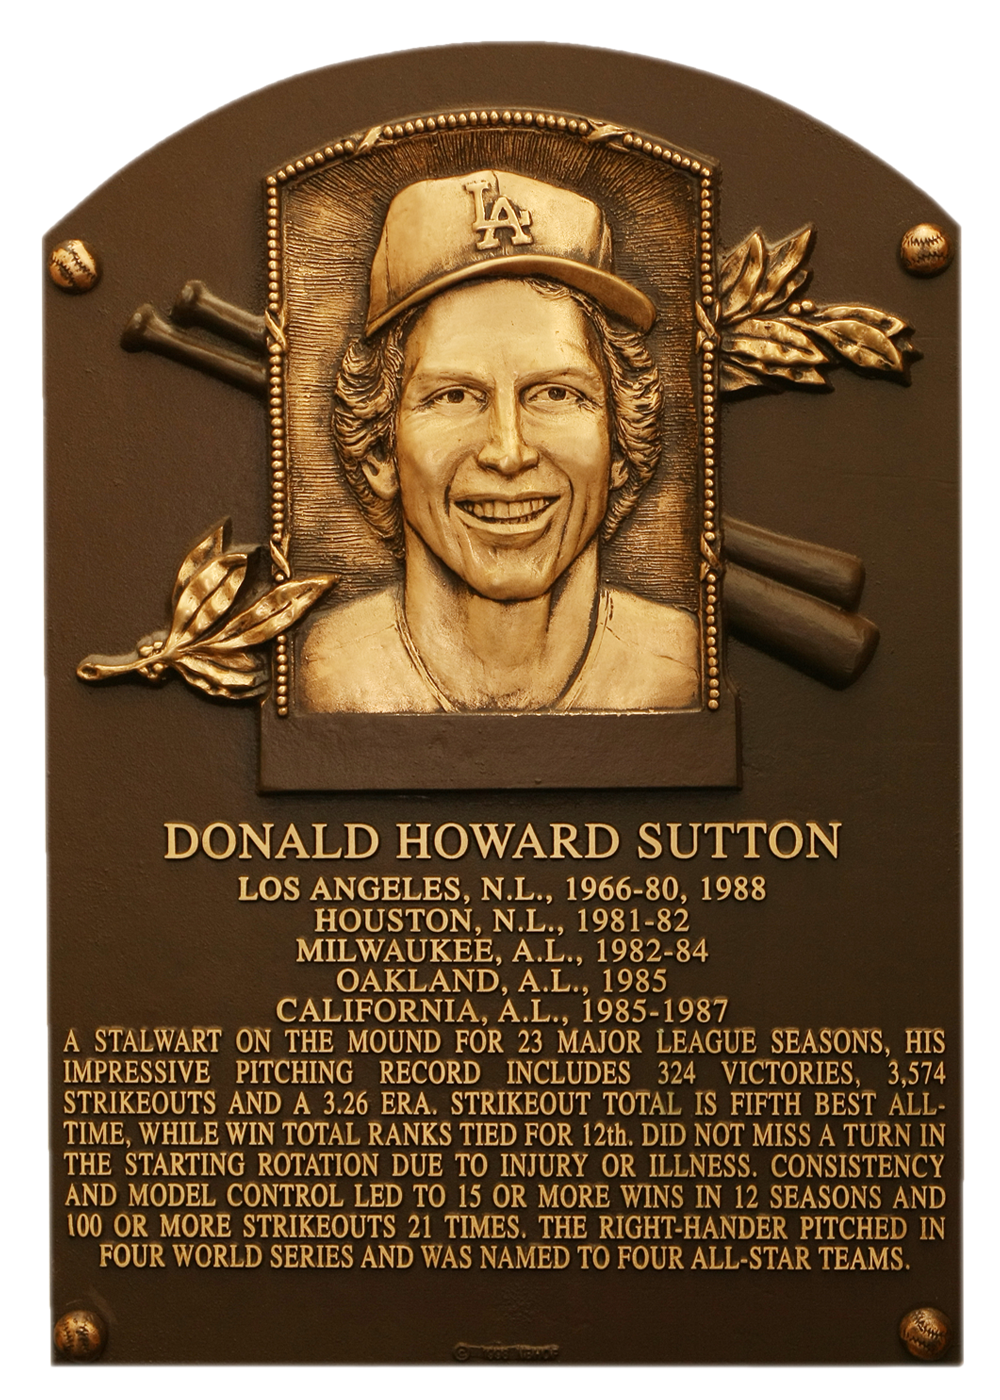 Don Sutton Hall of Fame plaque